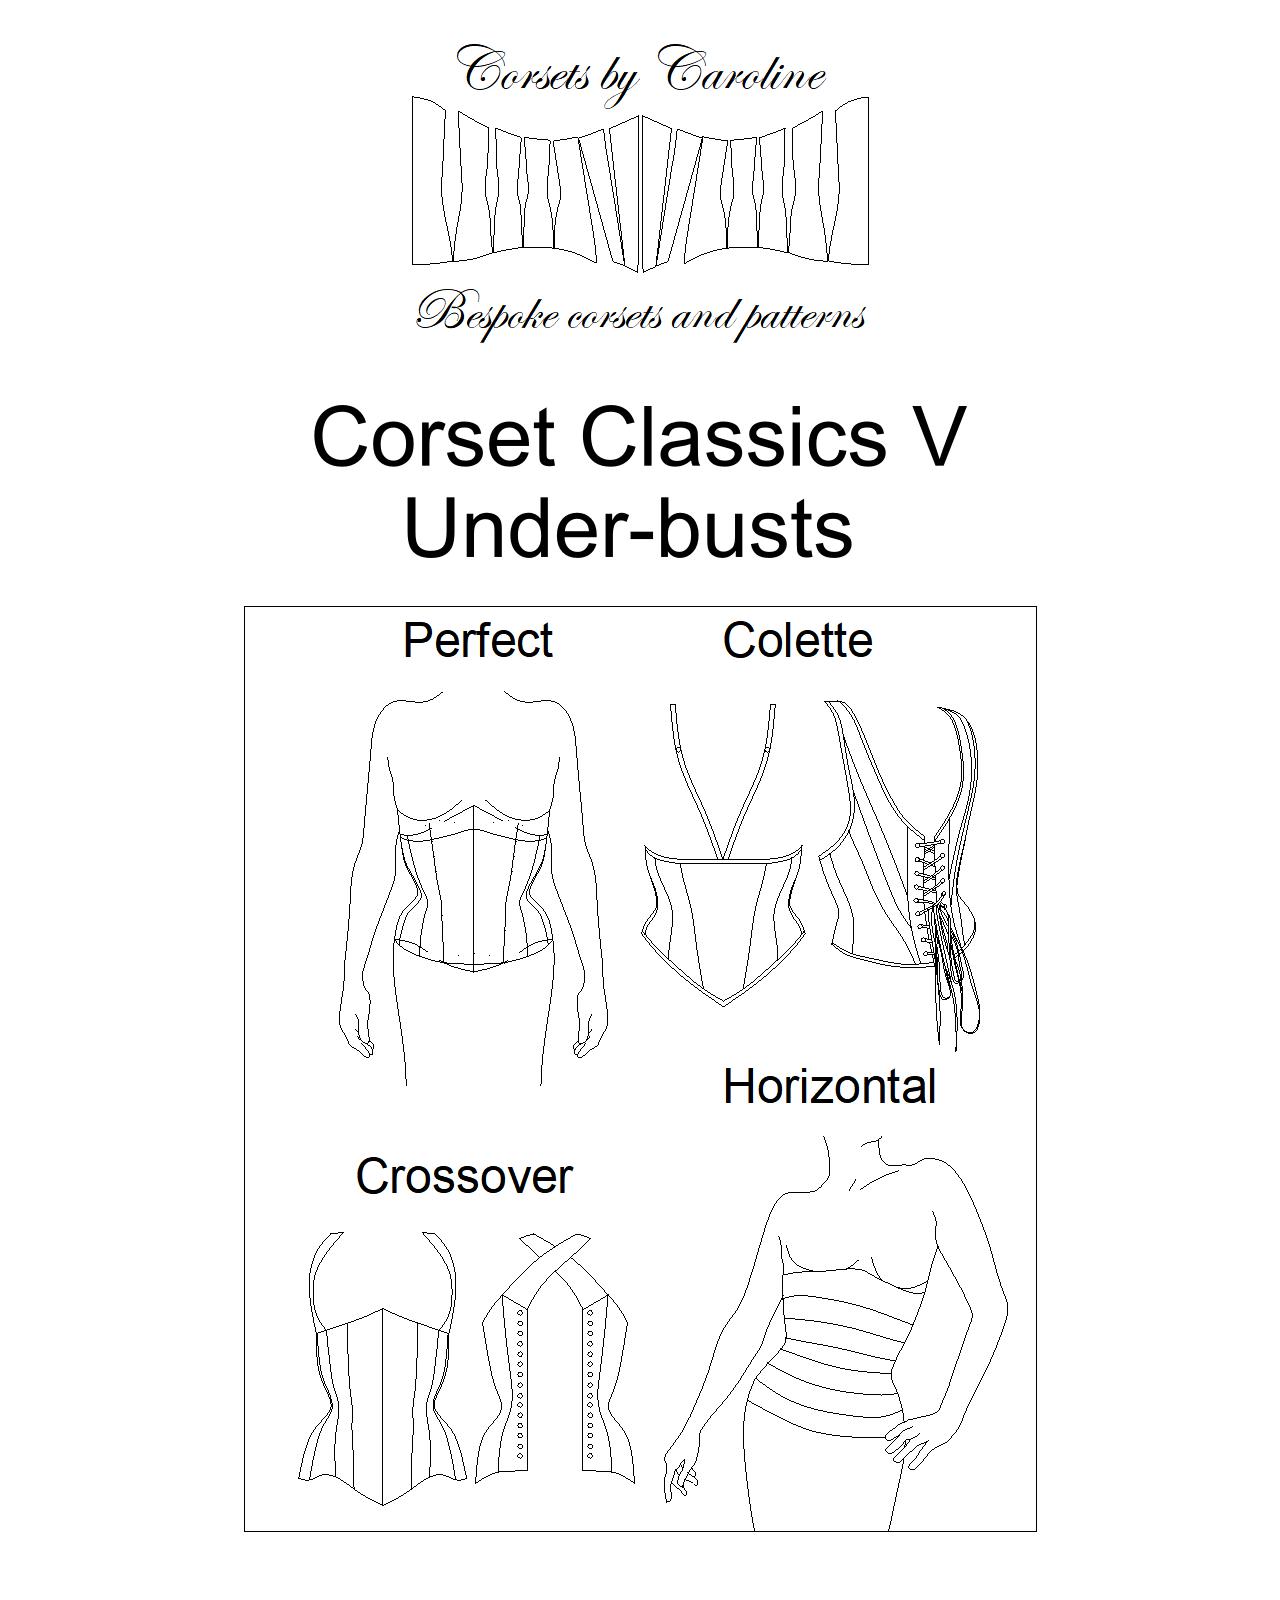 Corset Classics V - a collection of 4 under-bust patterns